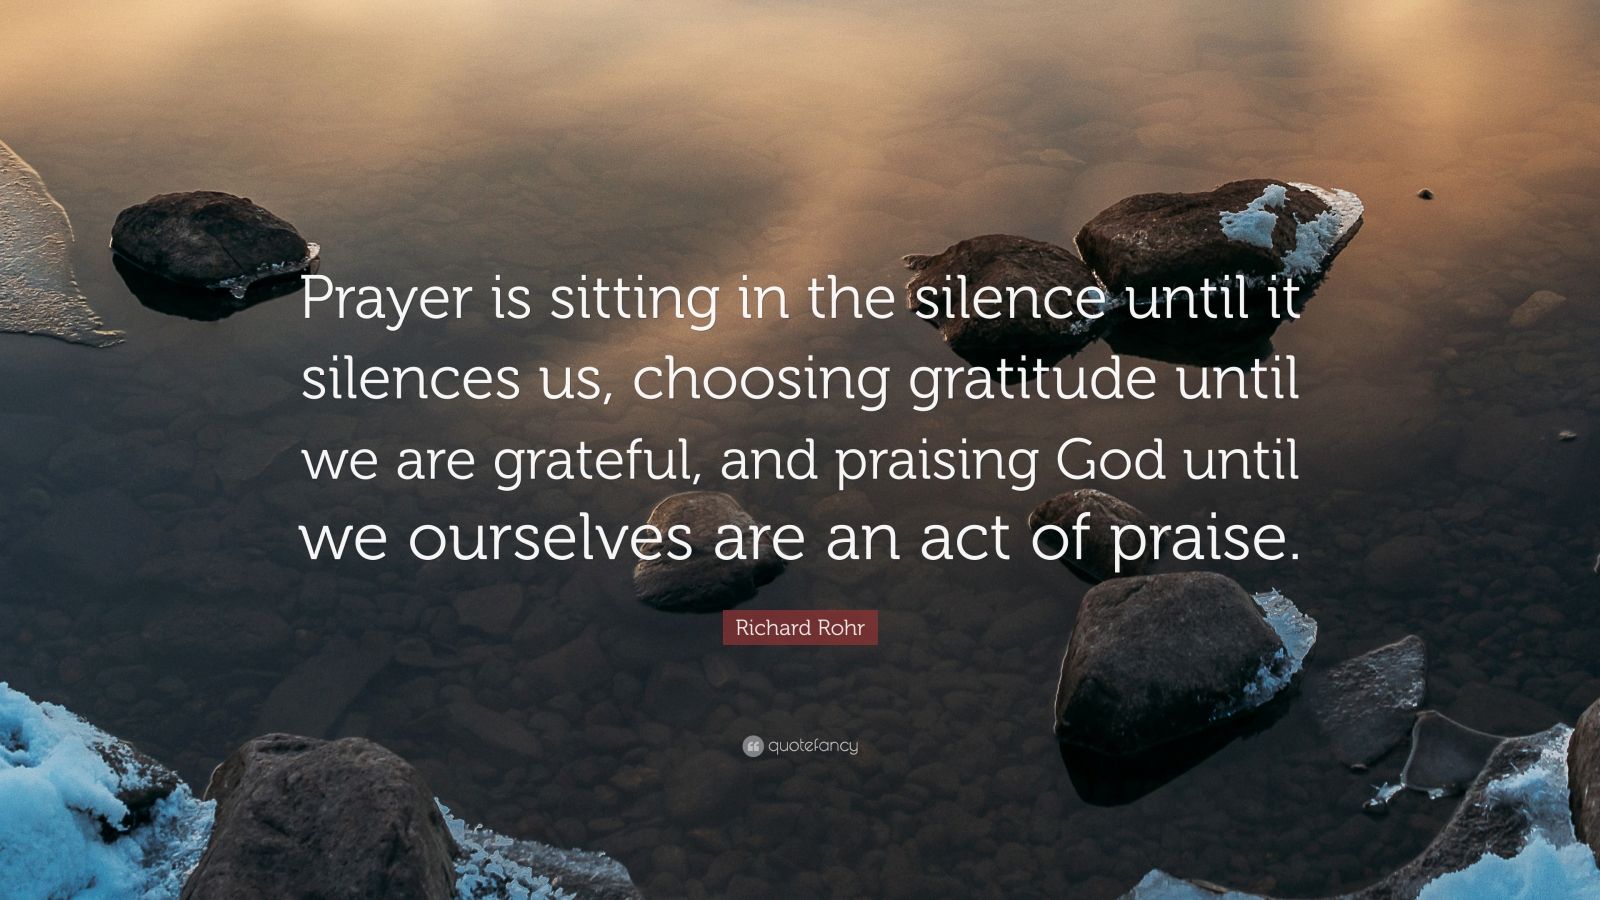 2335776-Richard-Rohr-Quote-Prayer-is-sitting-in-the-silence-until-it.jpg